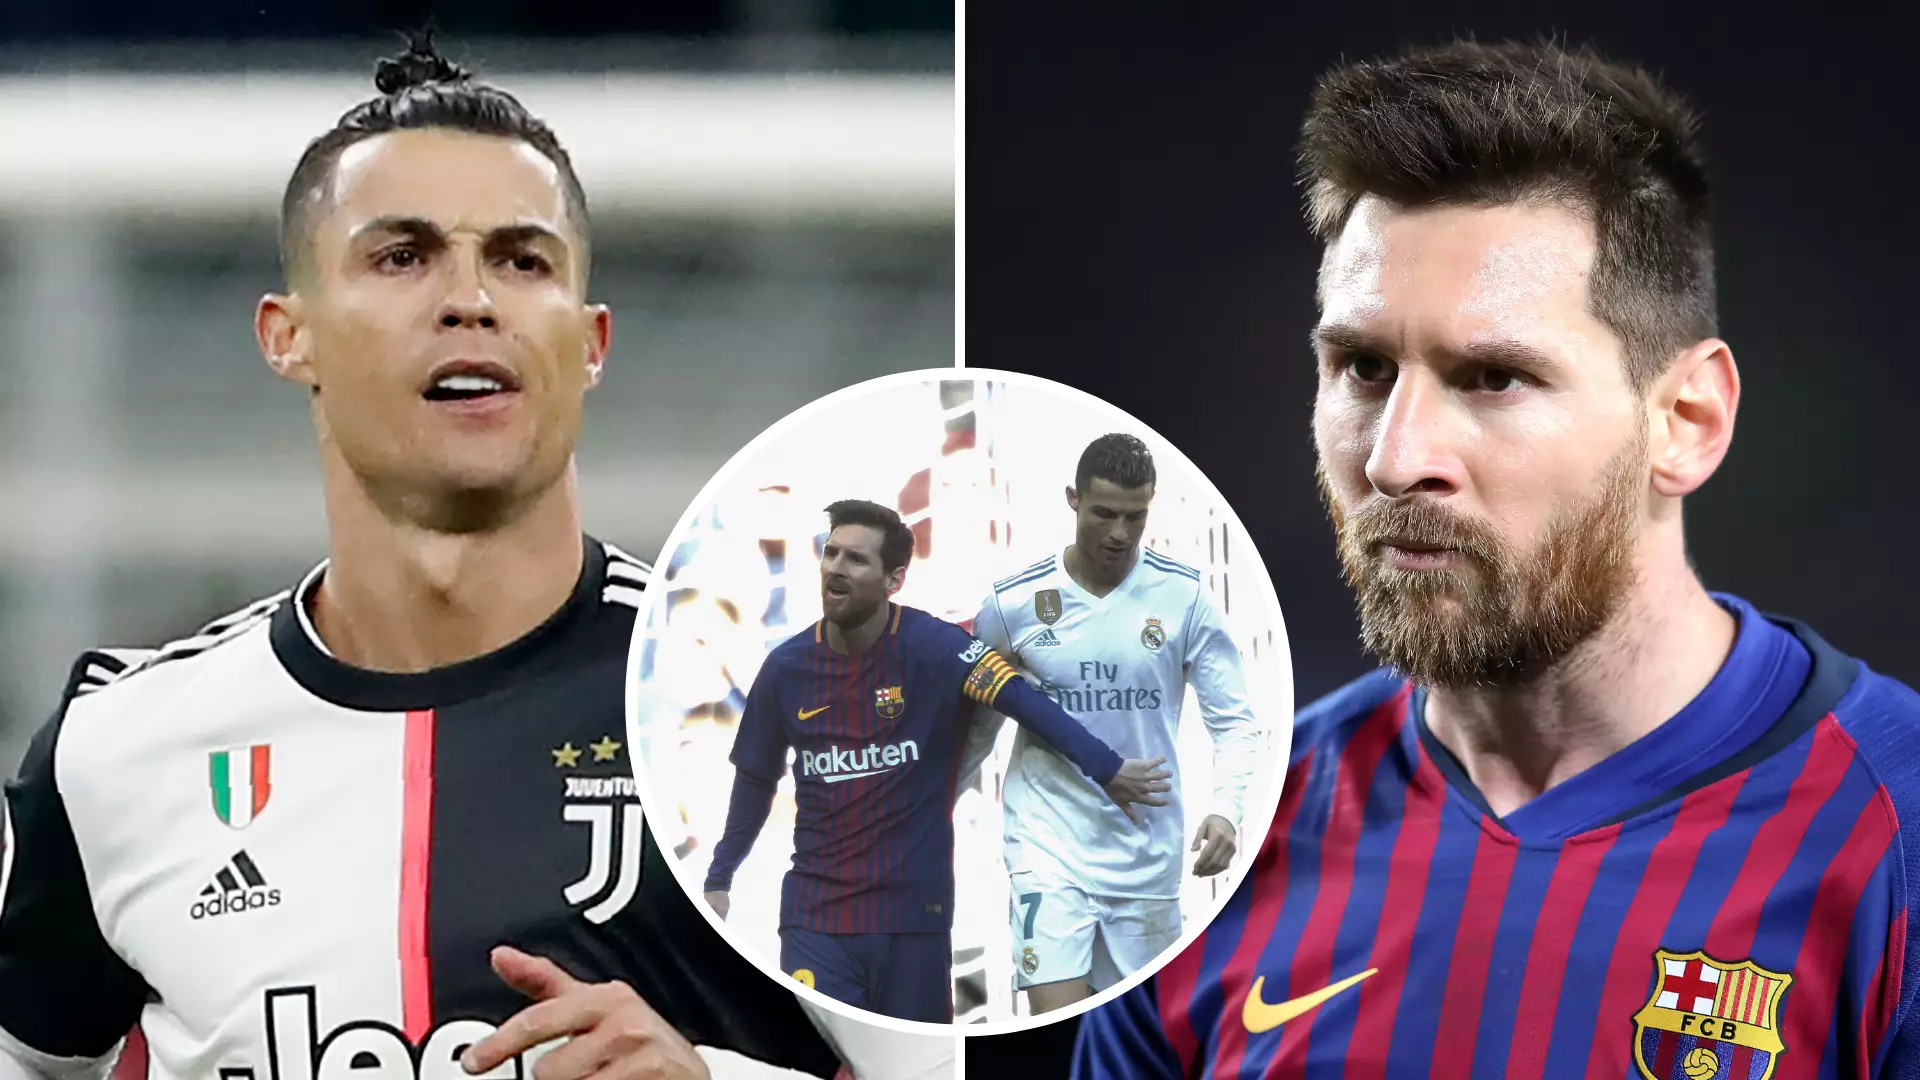 Cristiano Ronaldo And Lionel Messi’s Nine Different Abilities Compared And Awarded Individual Ratings